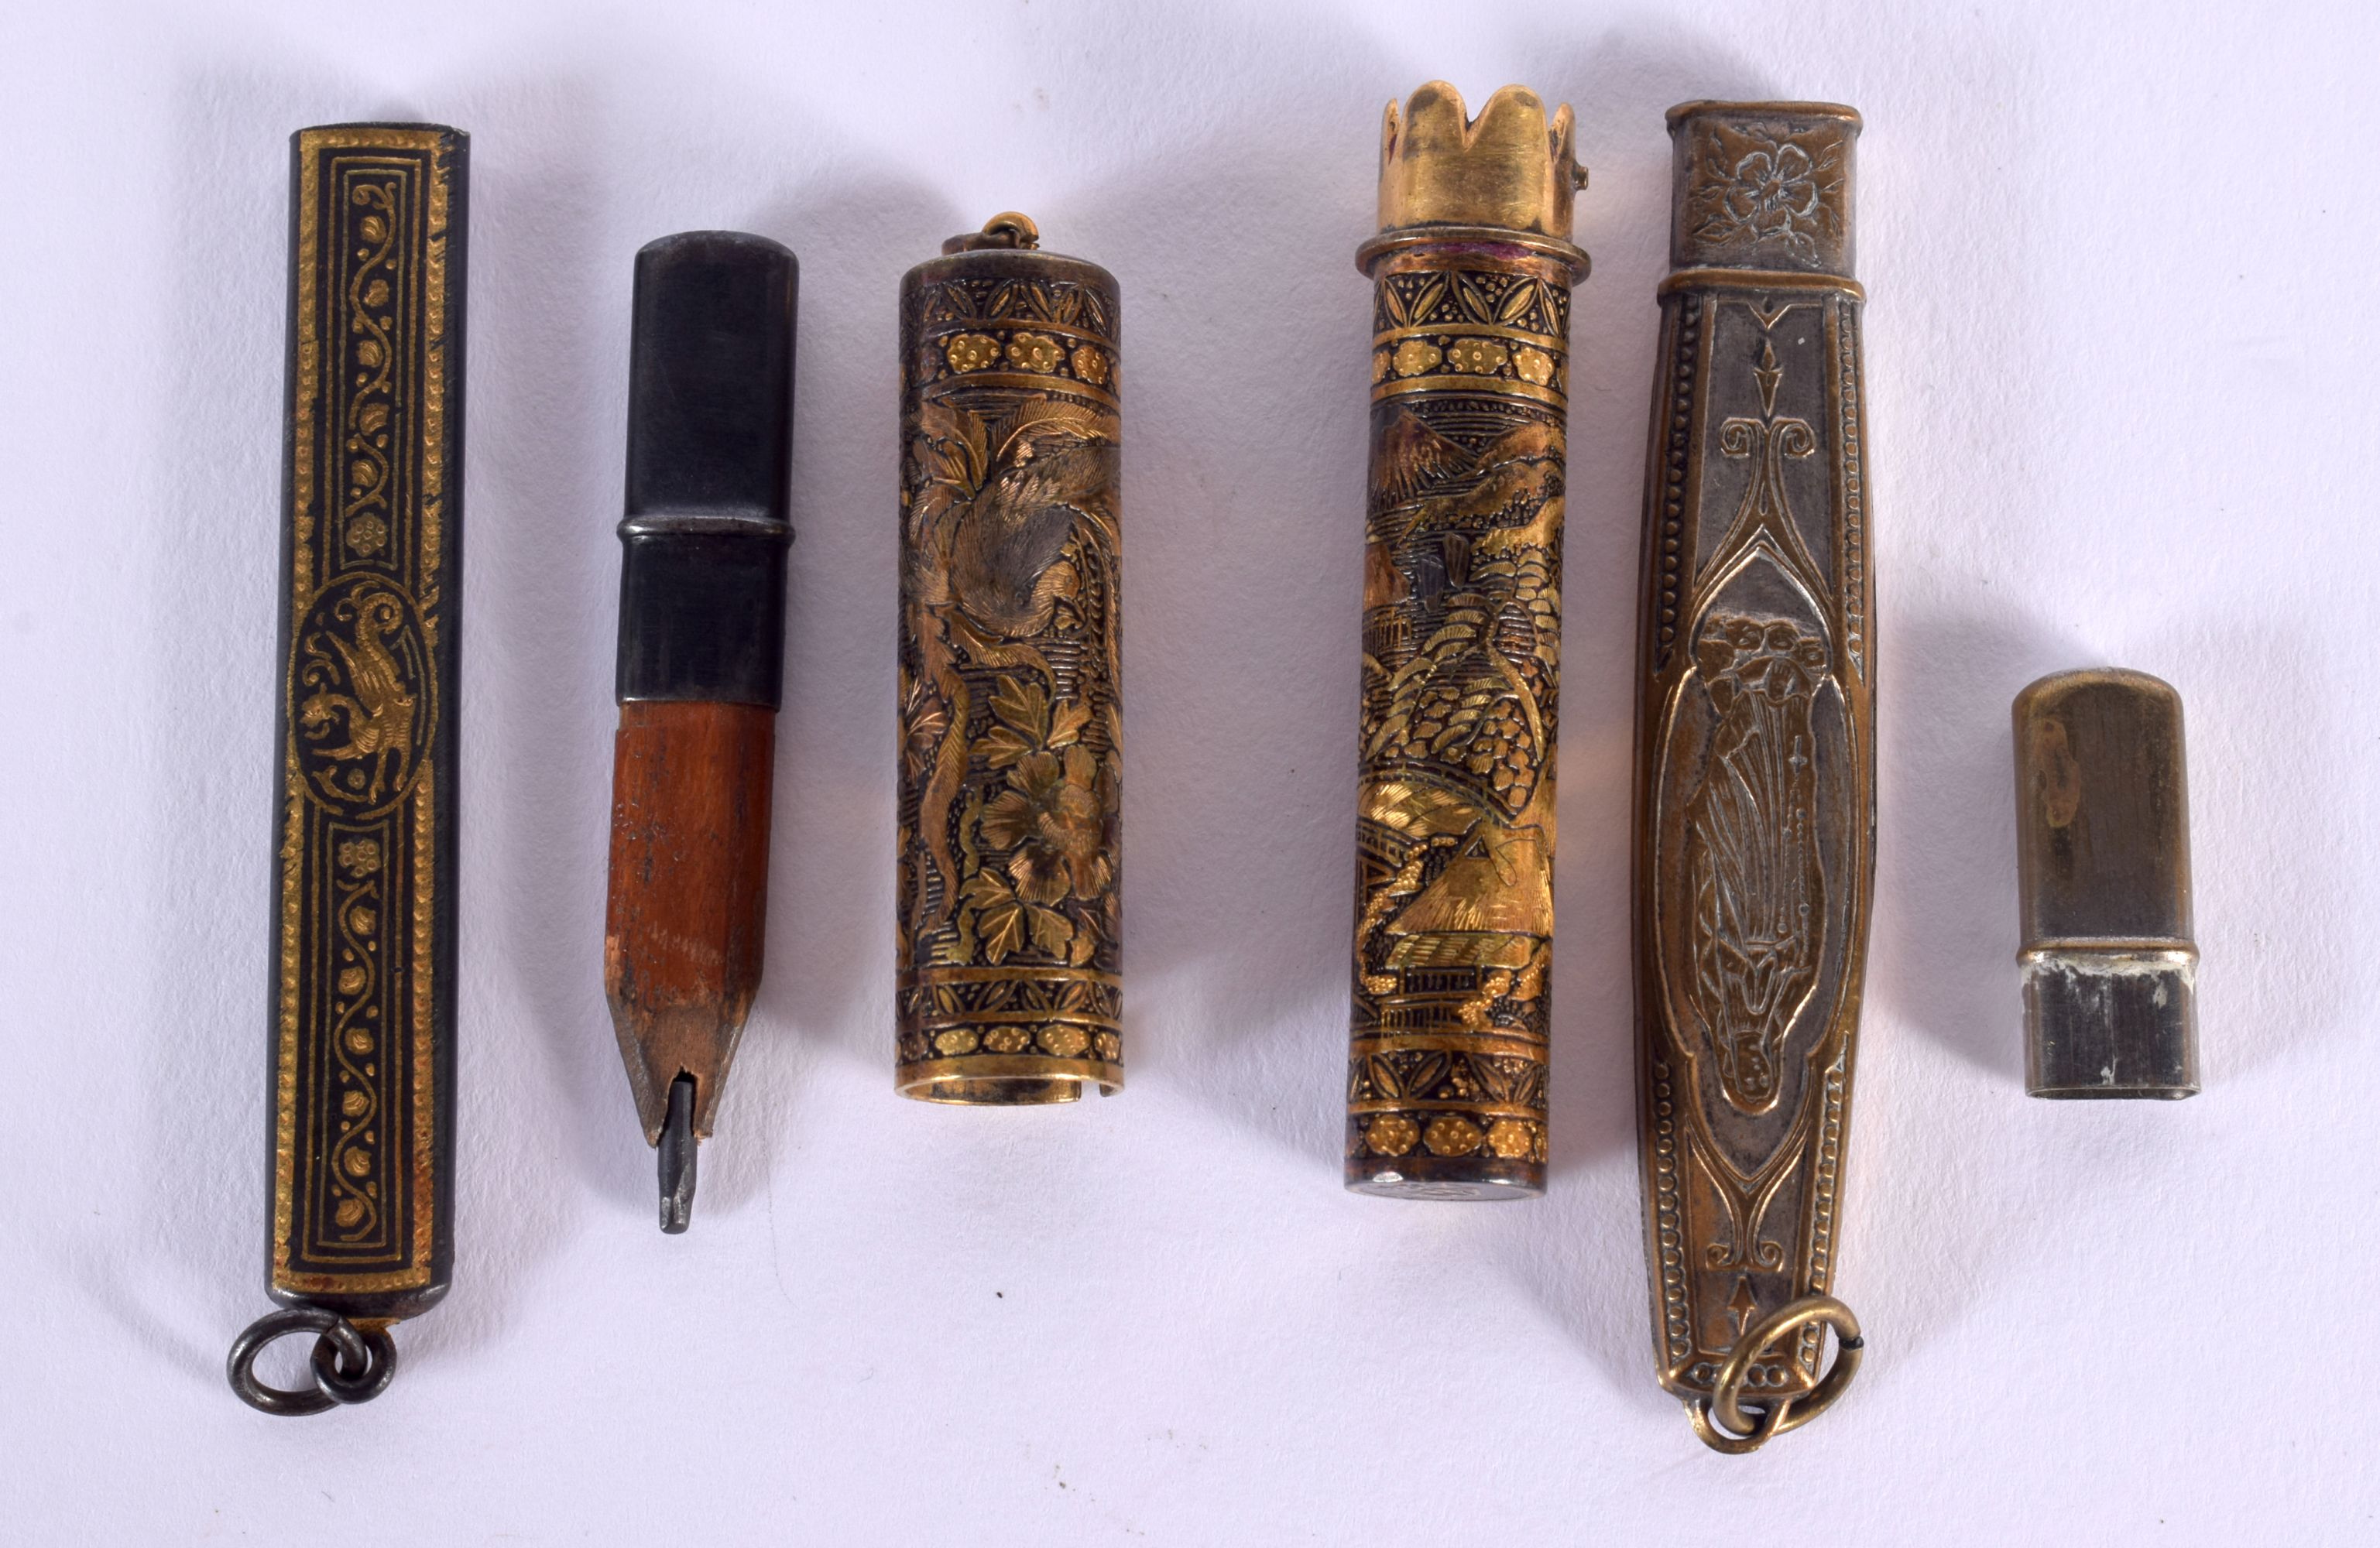 AN EARLY 20TH CENTURY JAPANESE MEIJI PERIOD MIXED METAL LEAD PENCIL HOLDER together with two others. - Image 3 of 3